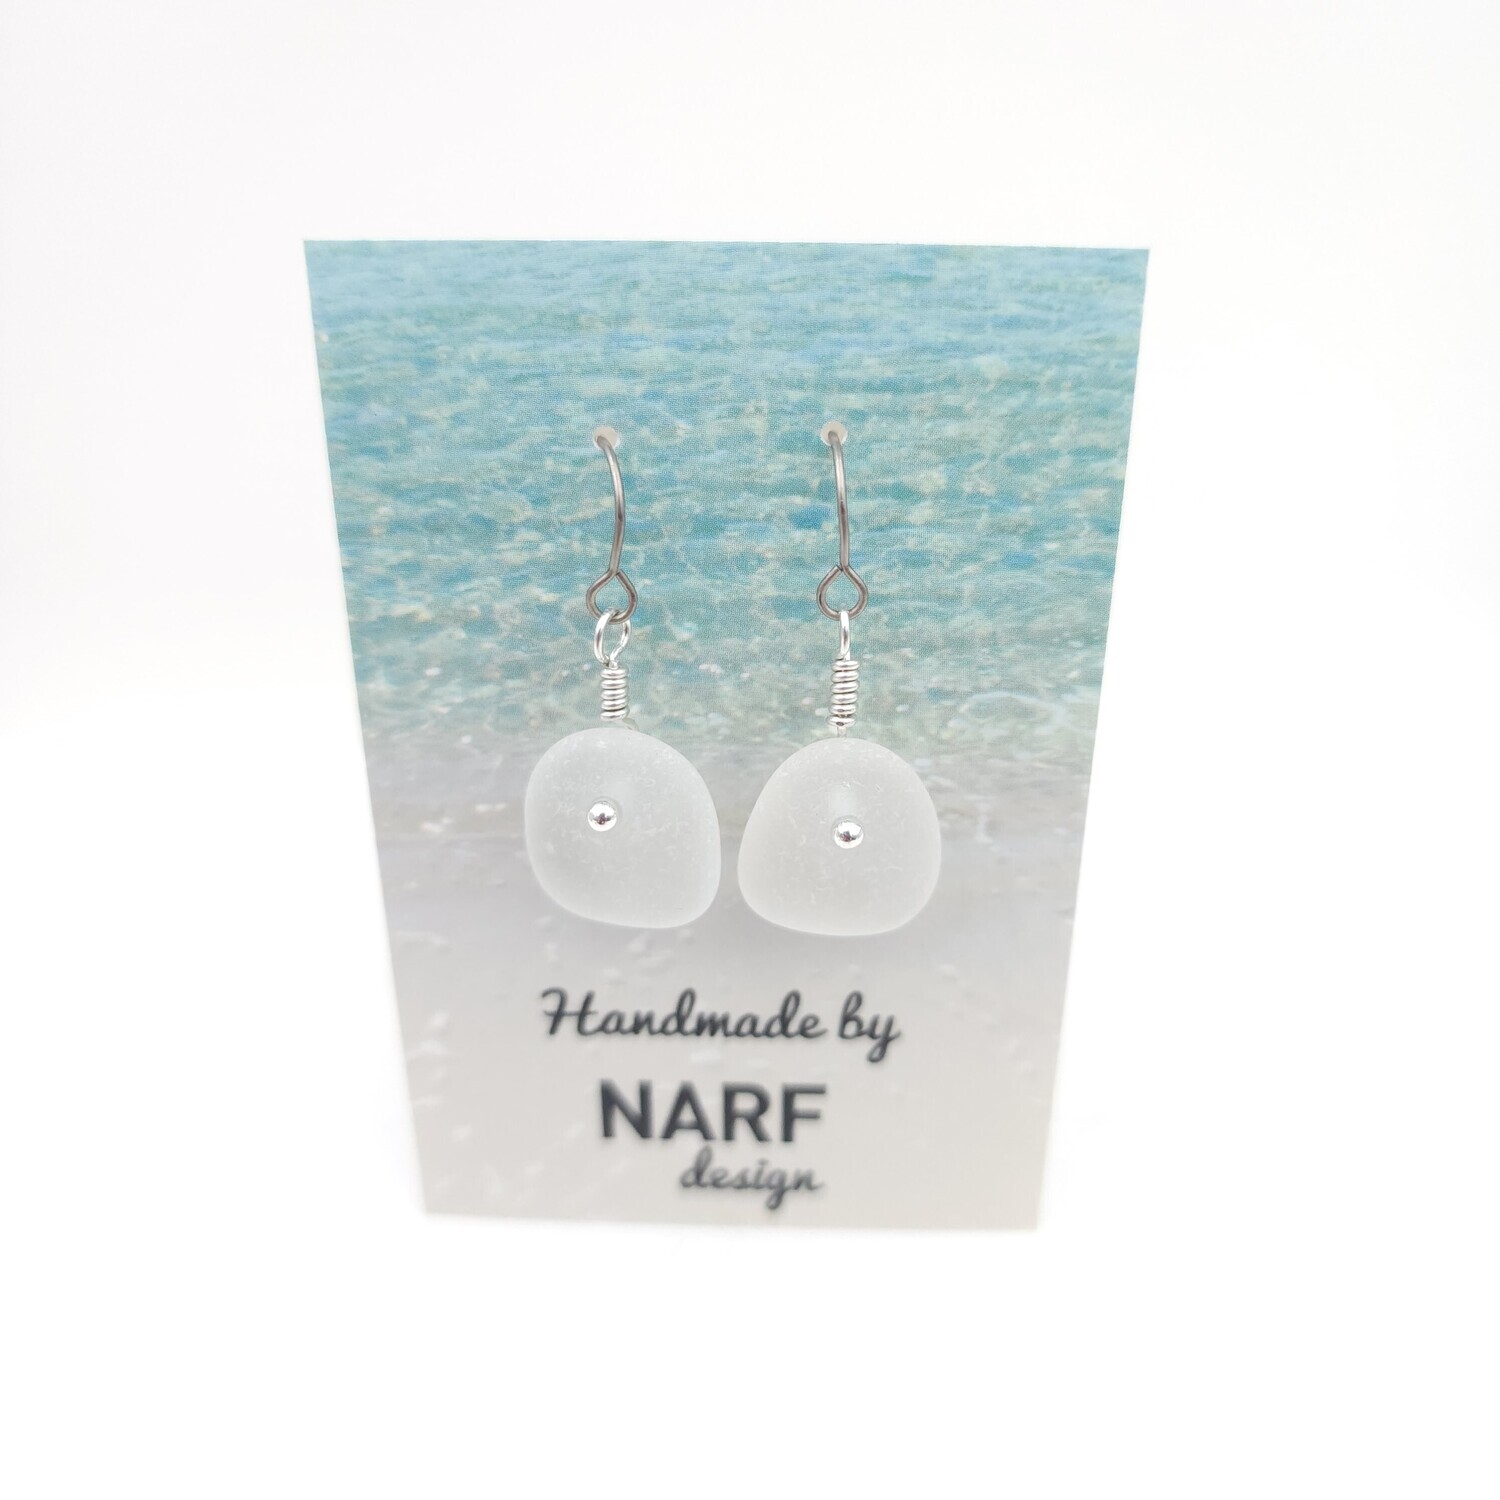 Lake Erie Beach Glass Earrings in Sterling Silver with Titanium Ear Wires